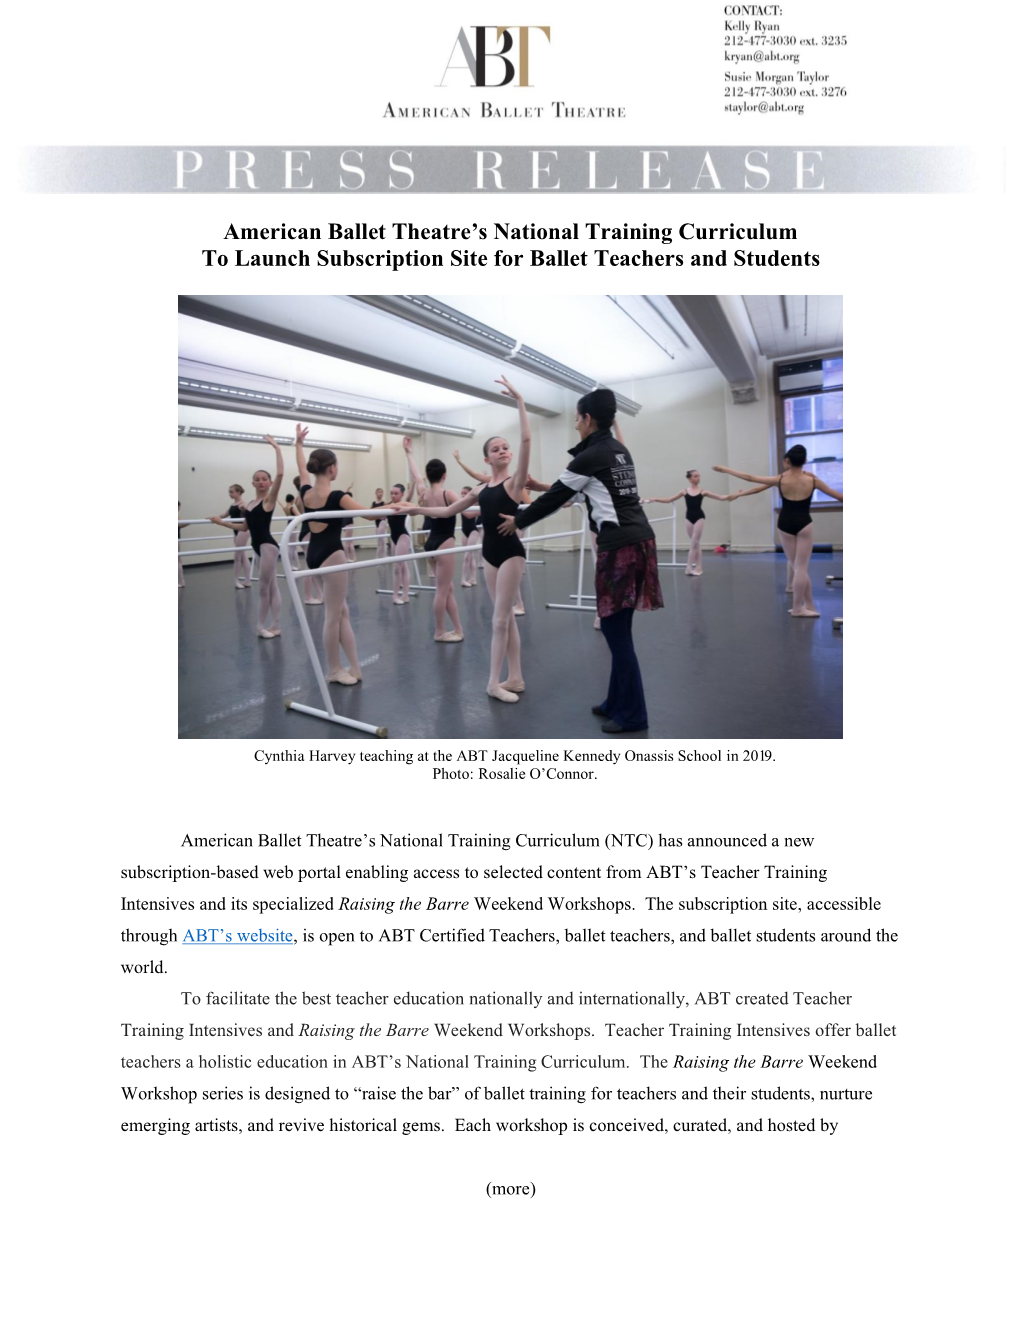 ABT National Training Curriculum Launches Subscription Site